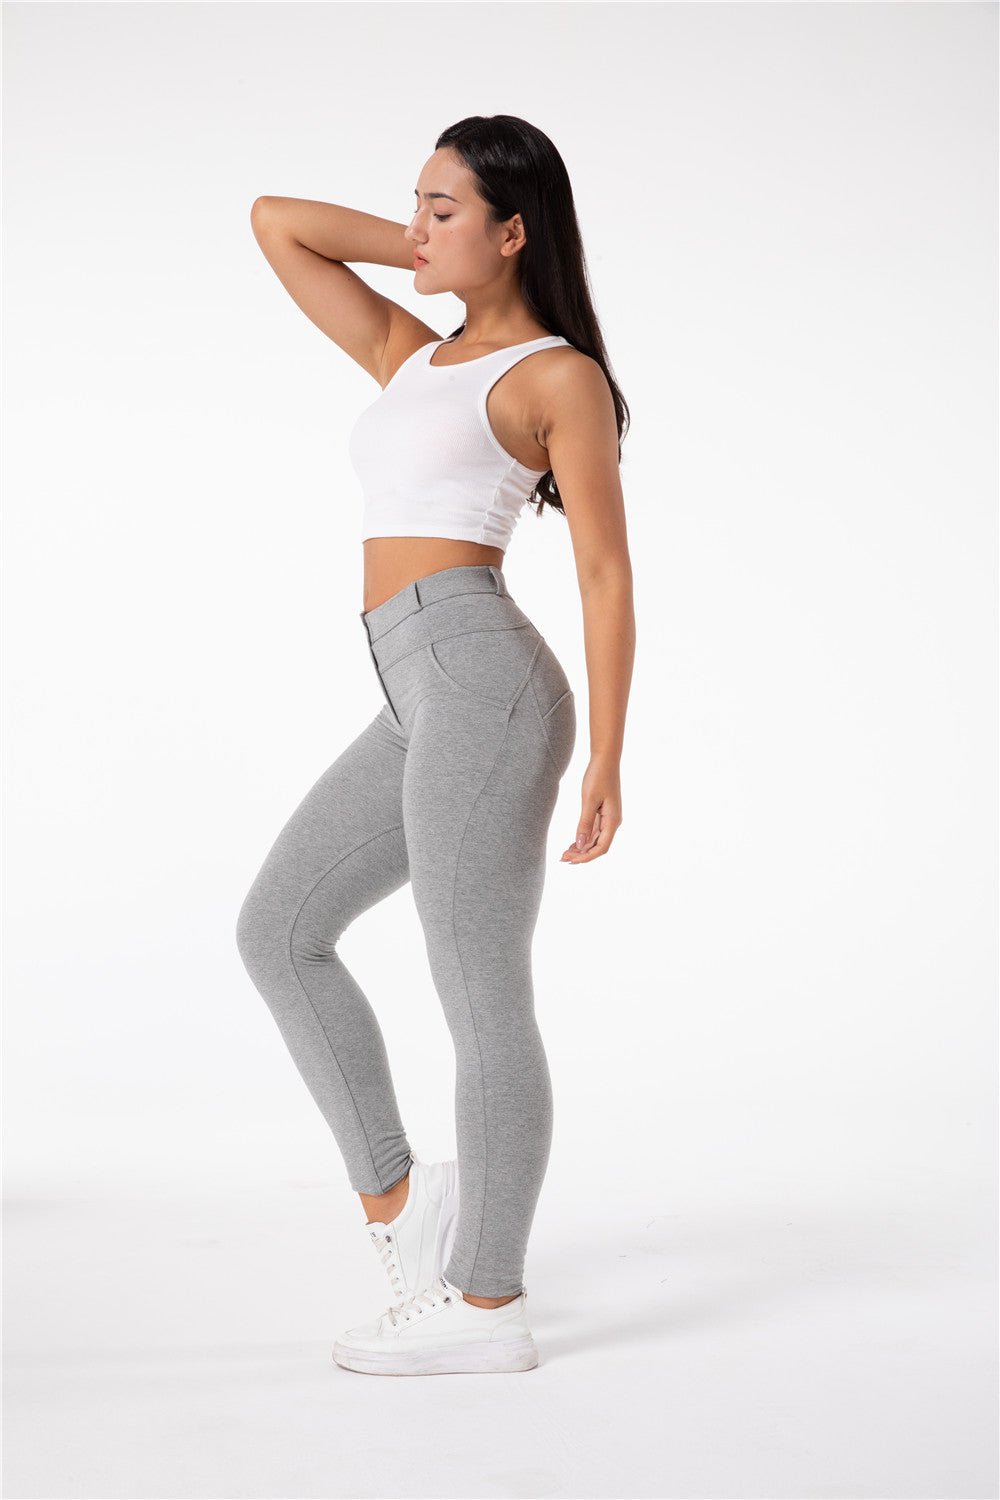 Melody Shaping Leggings Regular Mid Waist Cotton Grey - Melody South Africa